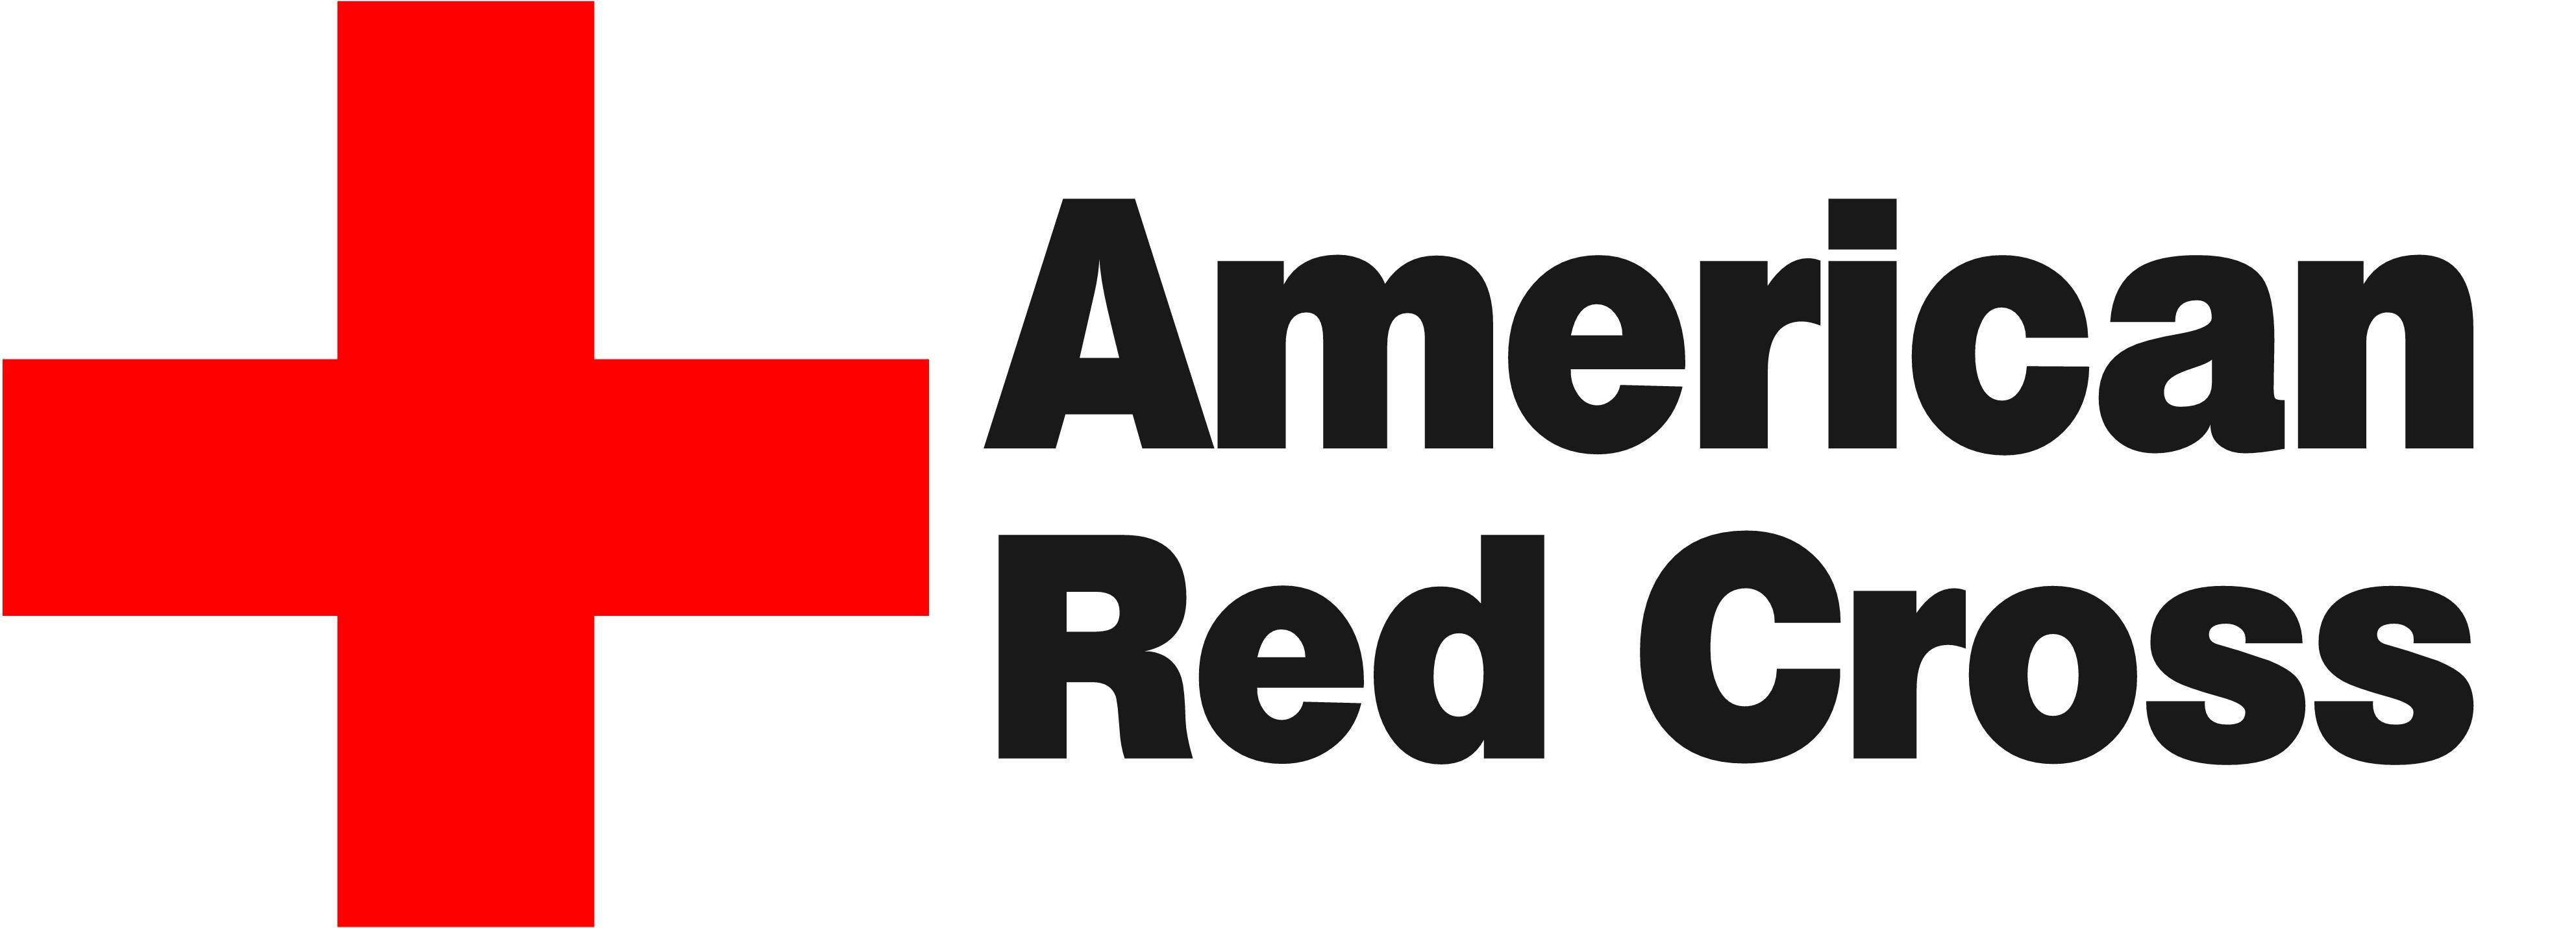 White with Red Cross Logistics Firm Logo - How to Create Catchy Slogans and Taglines | Visual Learning Center ...